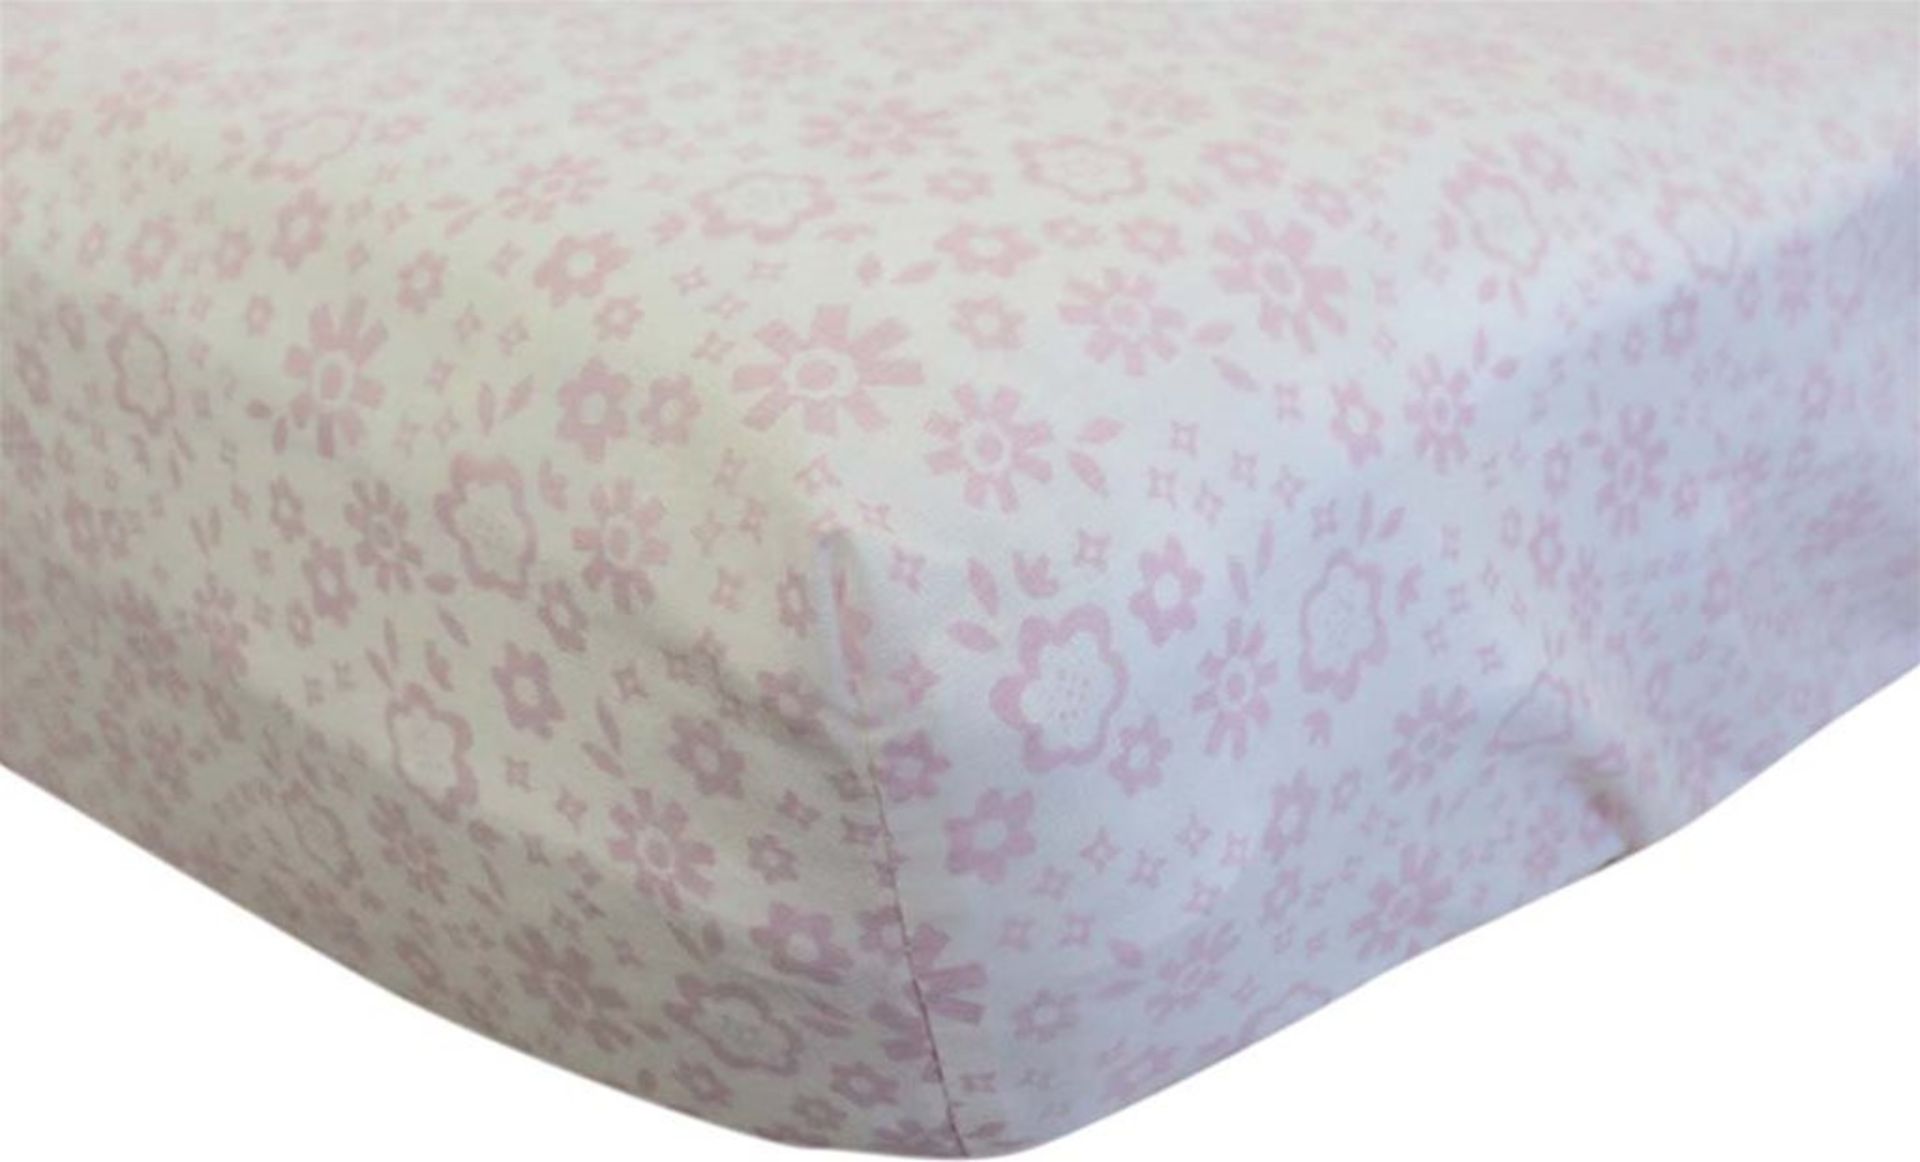 50 sets Beyond the Meadow Girl's Cotbed / Toddler Bed Fitted Sheet (140 x 70cm, Pink